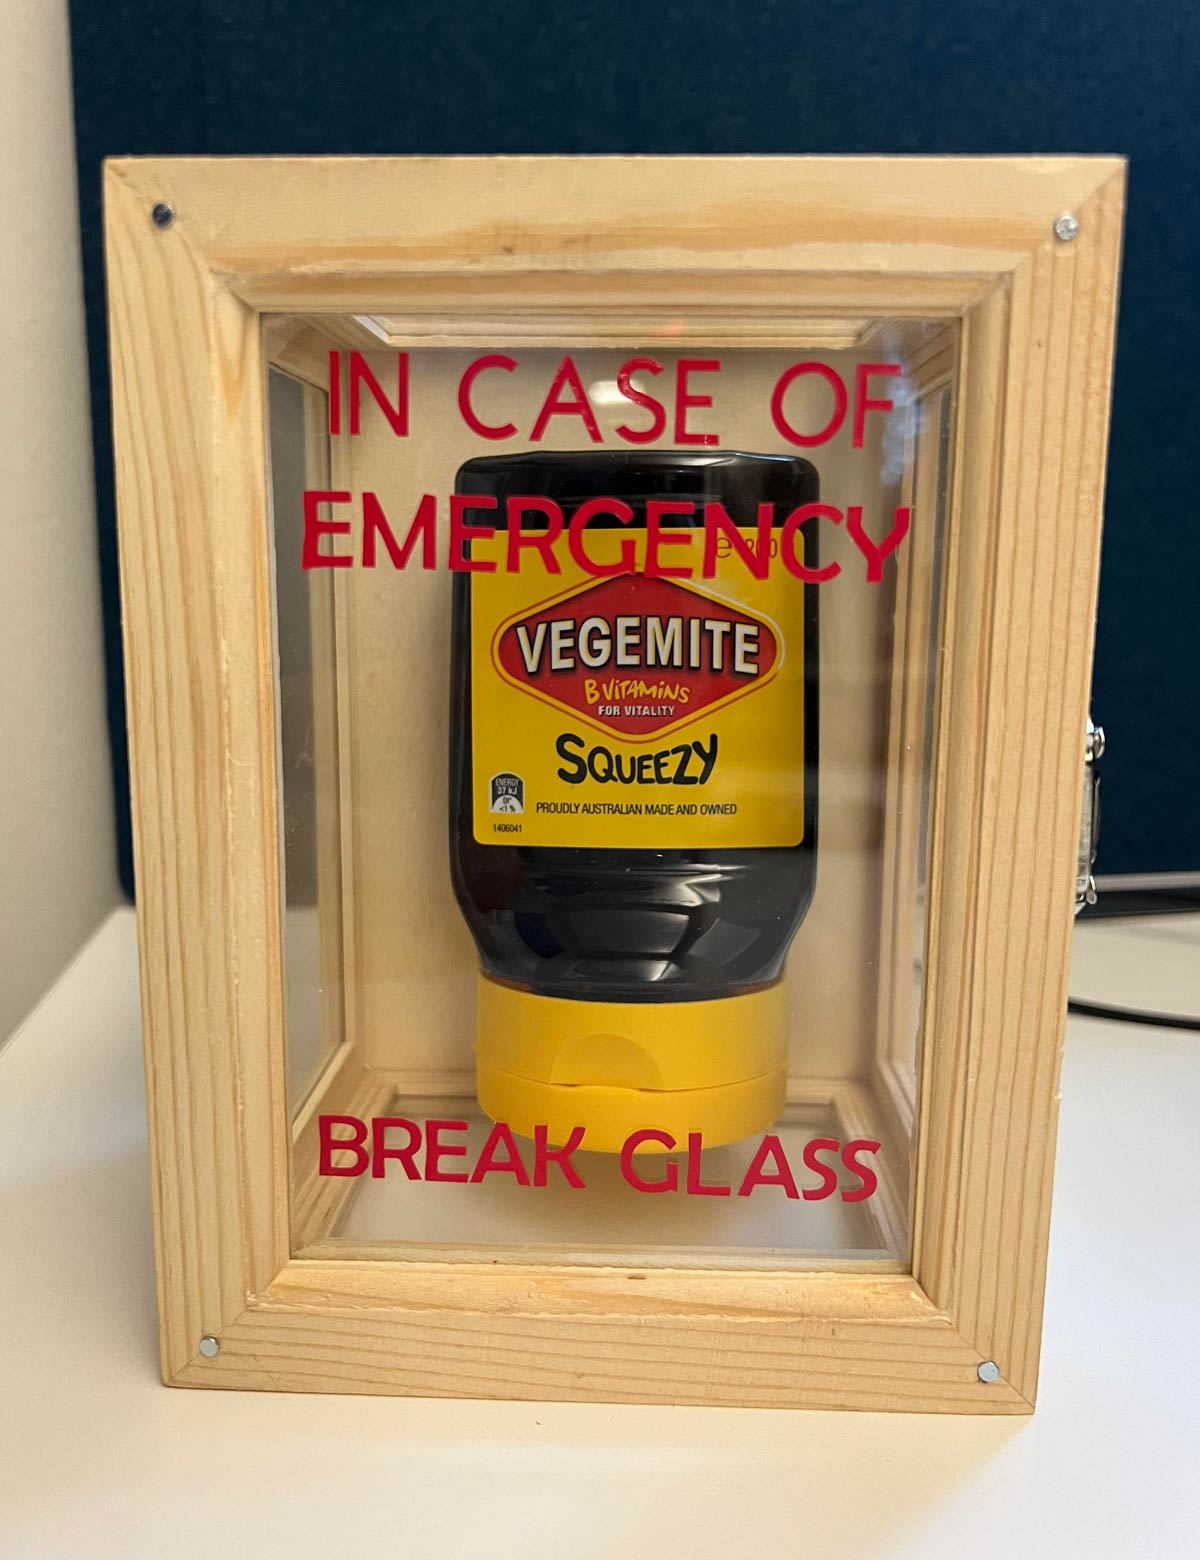 I have an Australian coworker (we are in US) and I’m giving him this as a gift today